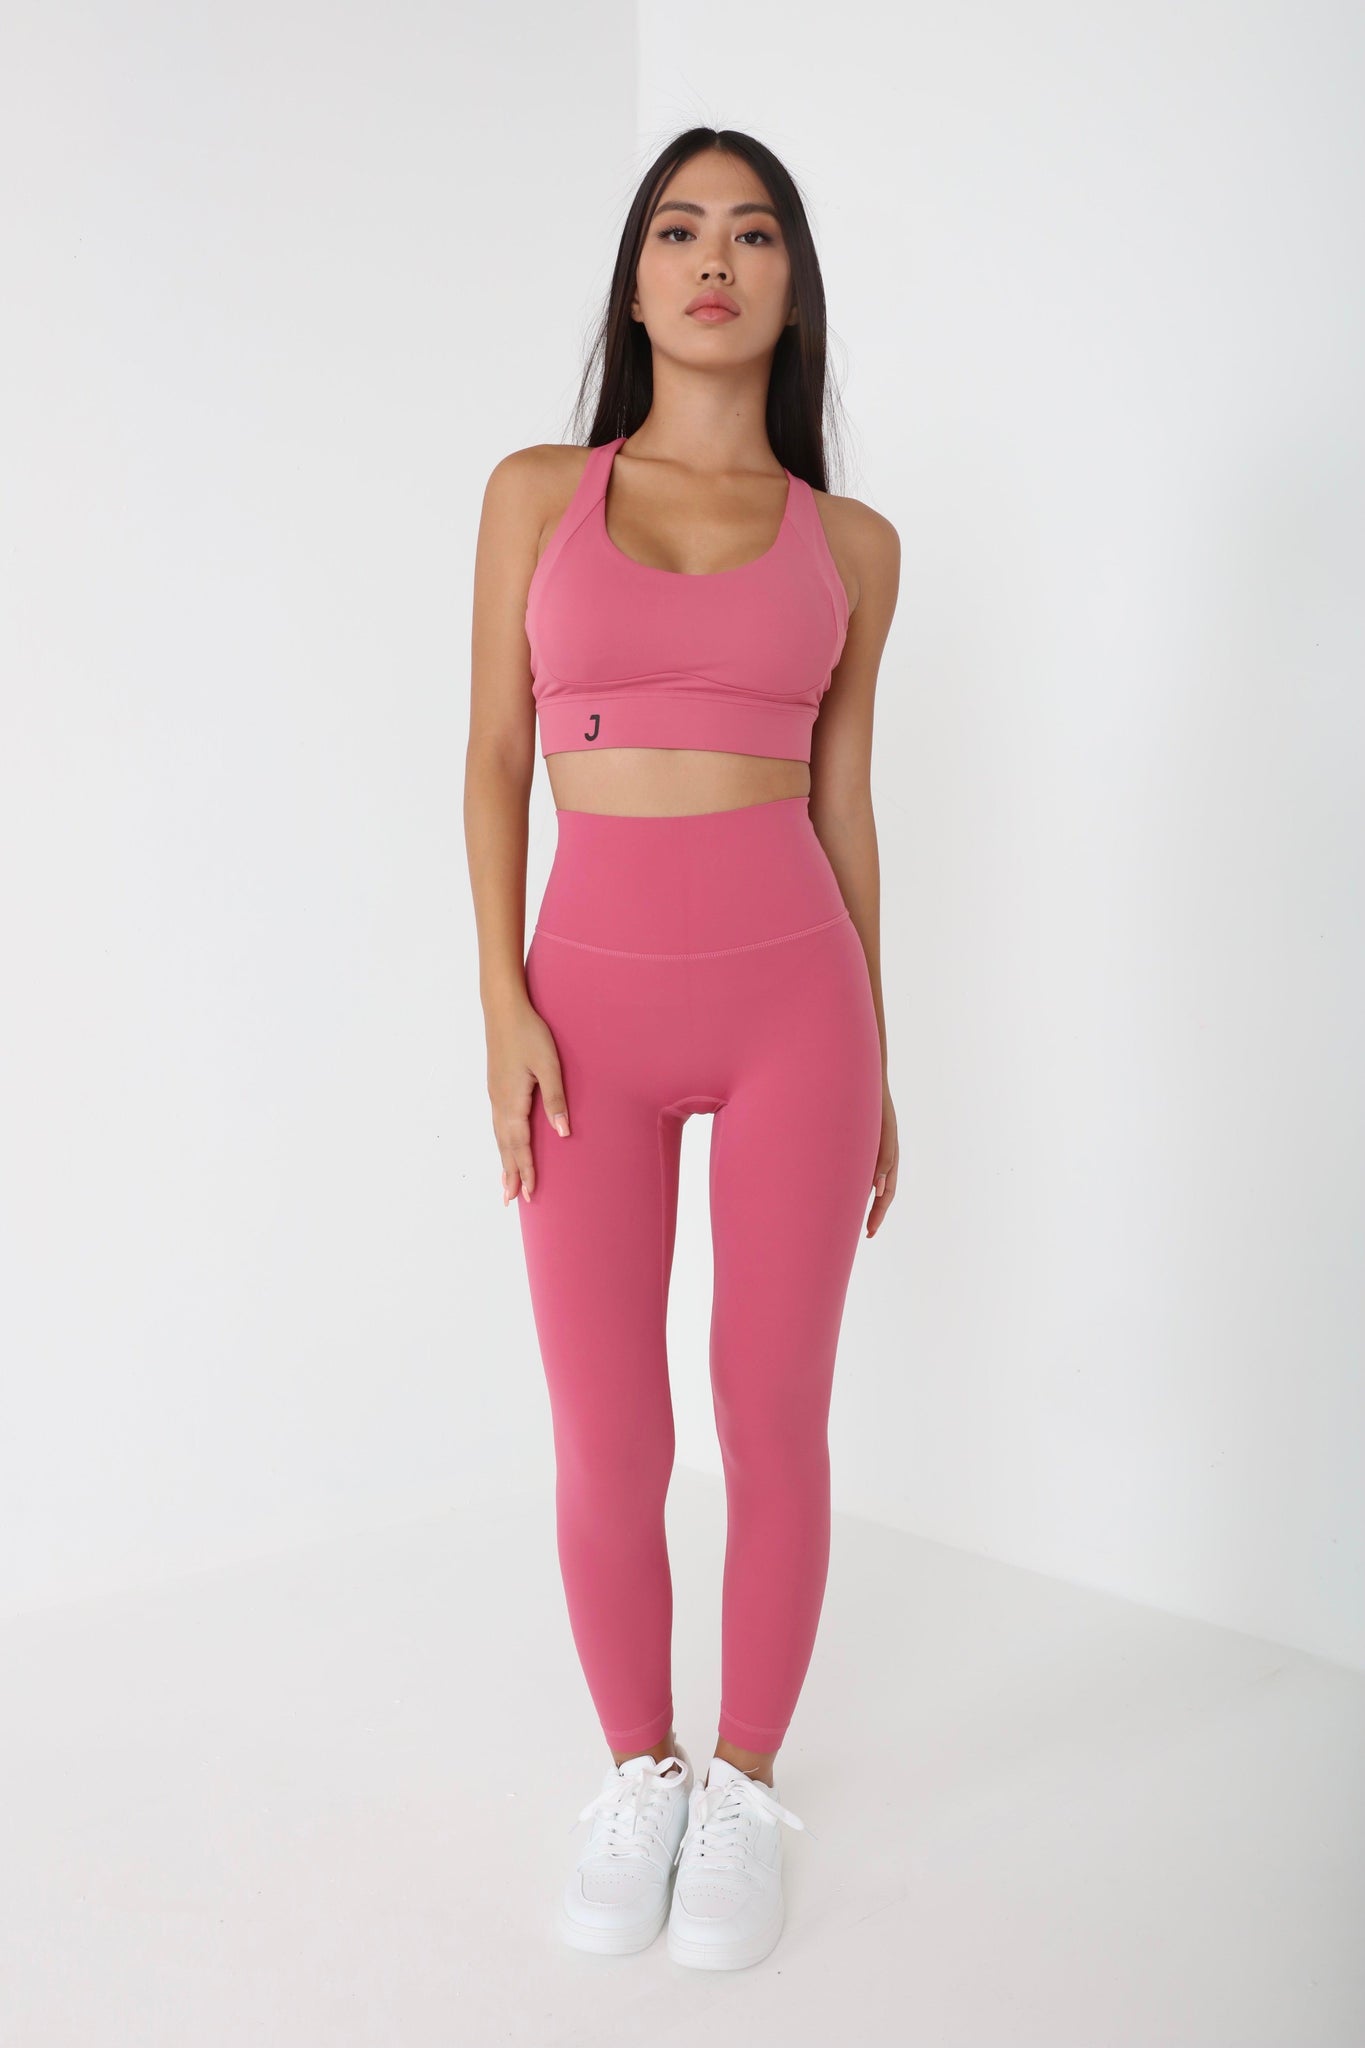 JUV fresh legging in pink color with matching top, full body front view.